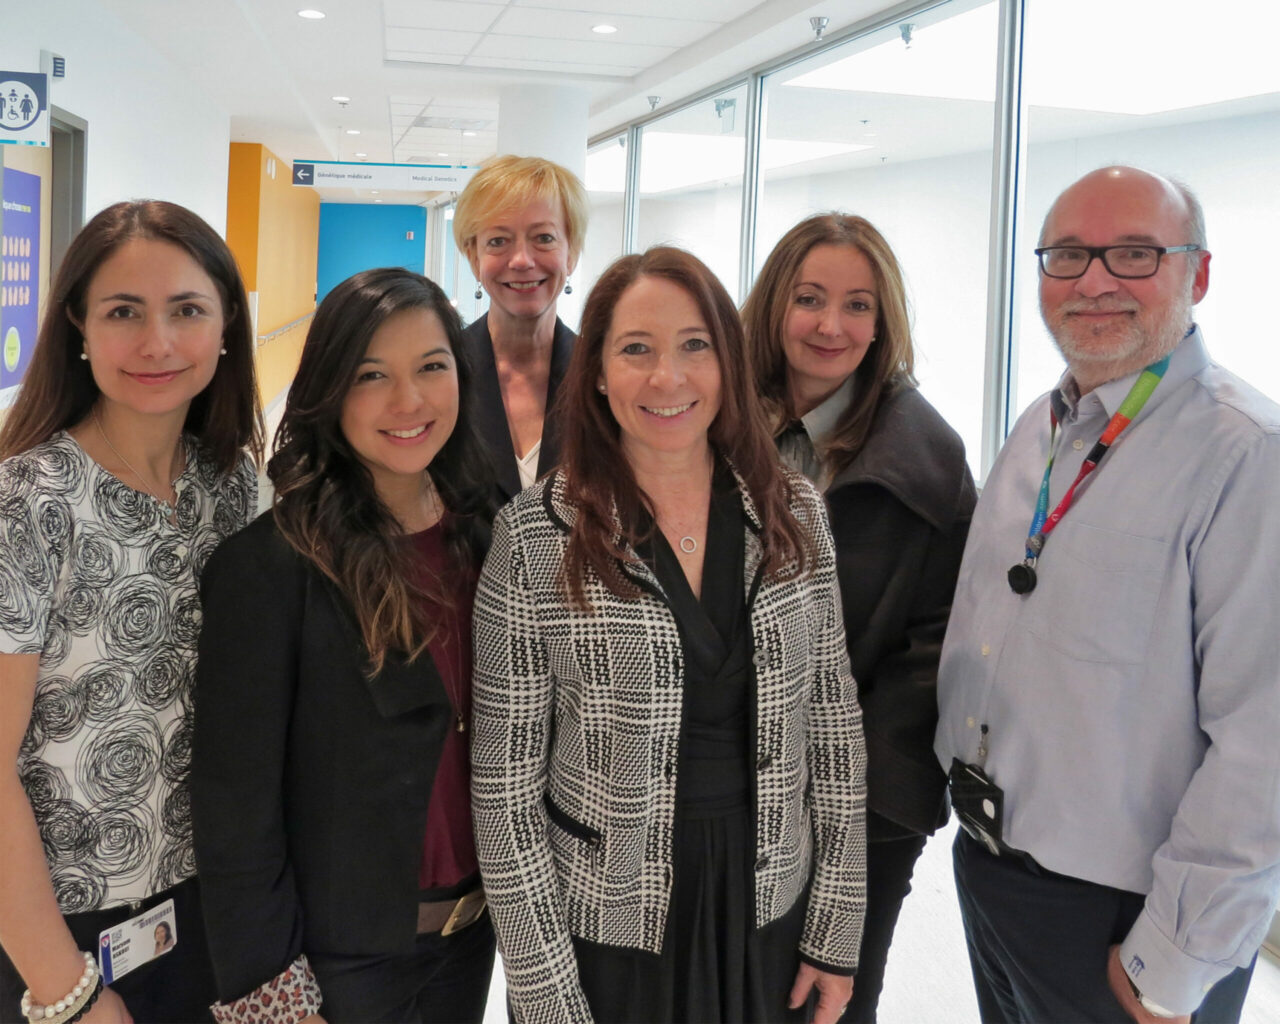 From left to right: Dr. Maryam Oskoui, (Neurologist)‎, Dr. Keiko Shikako-Thomas, (Occupational Therapist), Dr. Lucy Lachine (Social Worker), Dr. Annette Majnemer (Occupational Therapist)‎, Dr. Ariane Marelle (Cardiologist‎), Dr. Michael Shevell, (Neurologist) (Photo: MUHC)